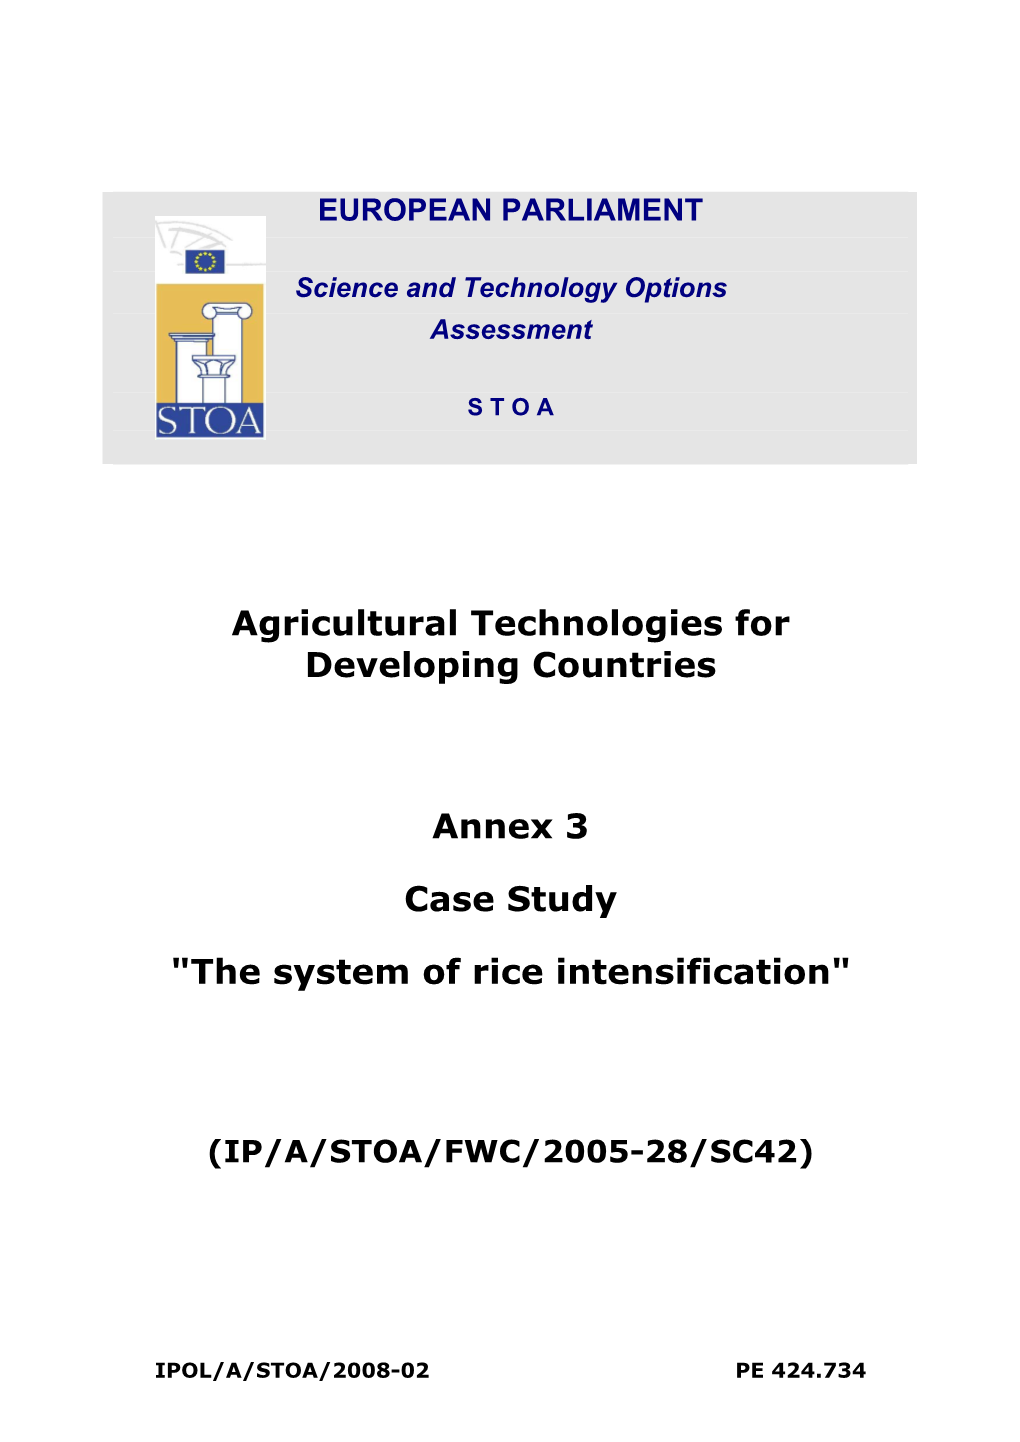 The System of Rice Intensification"